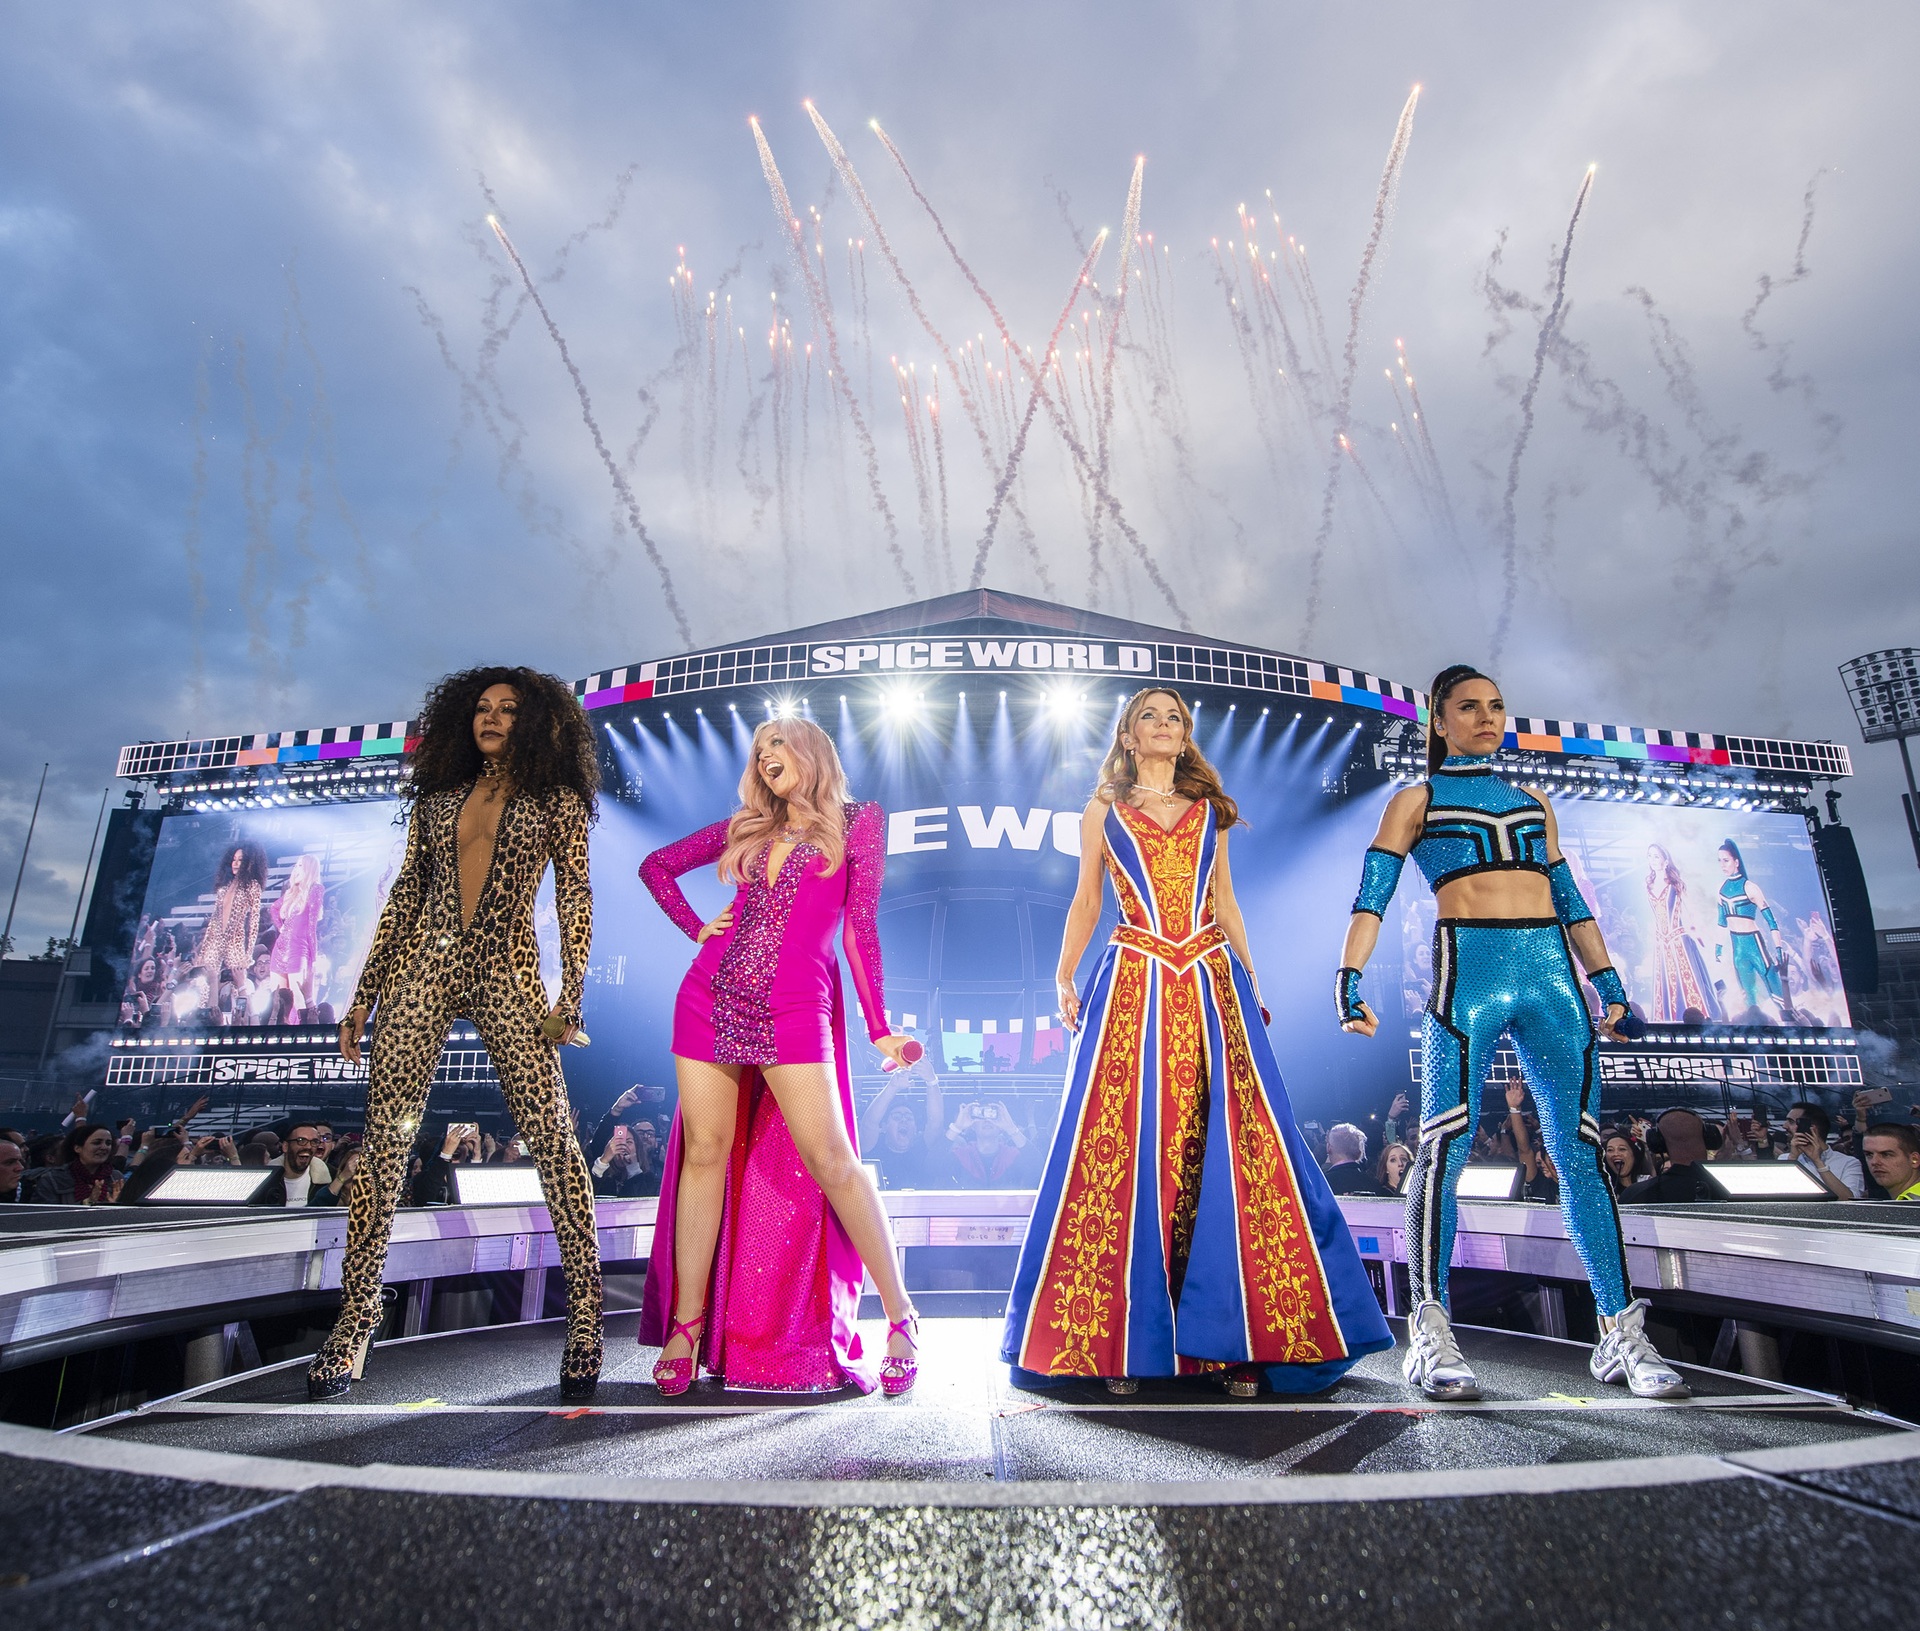 Melanie Brown, left to right, Emma Bunton, Geri Halliwell and Melanie Chisholm of the Spice Girls have performed without Victoria in the past.